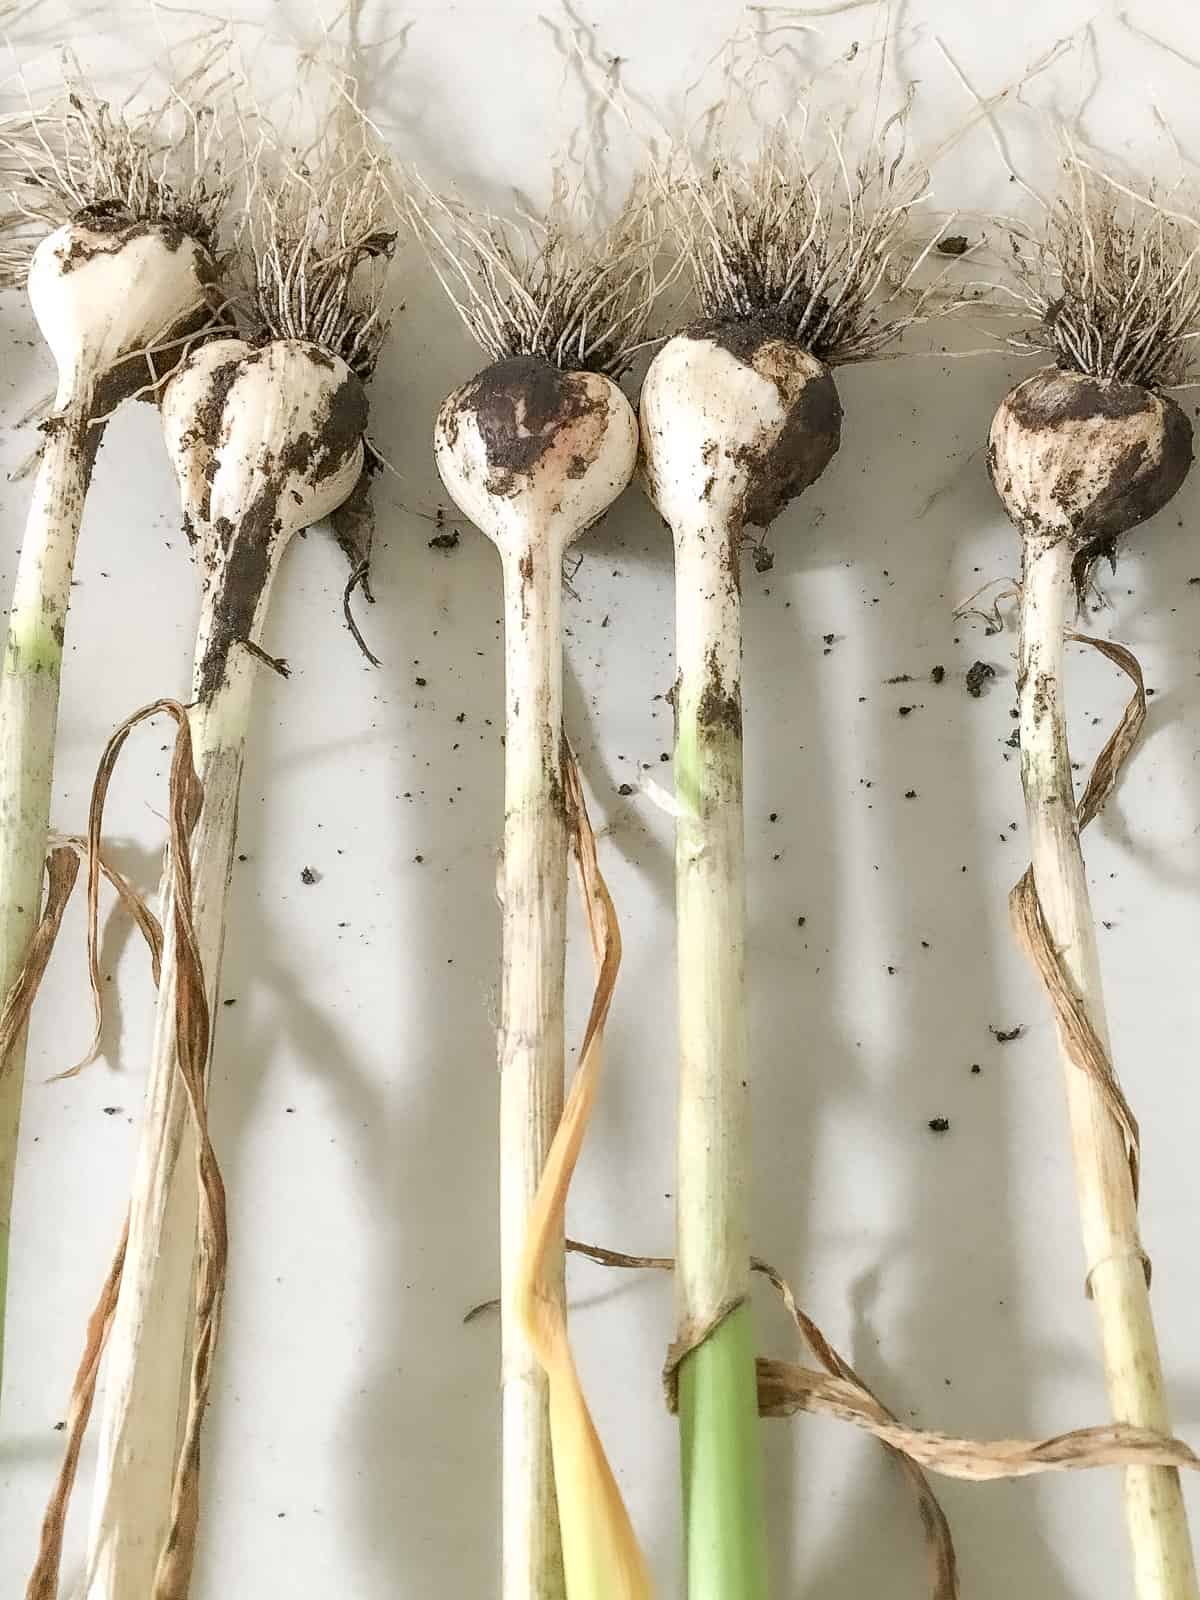 An image of a bunch of harvested garlic on a white background.